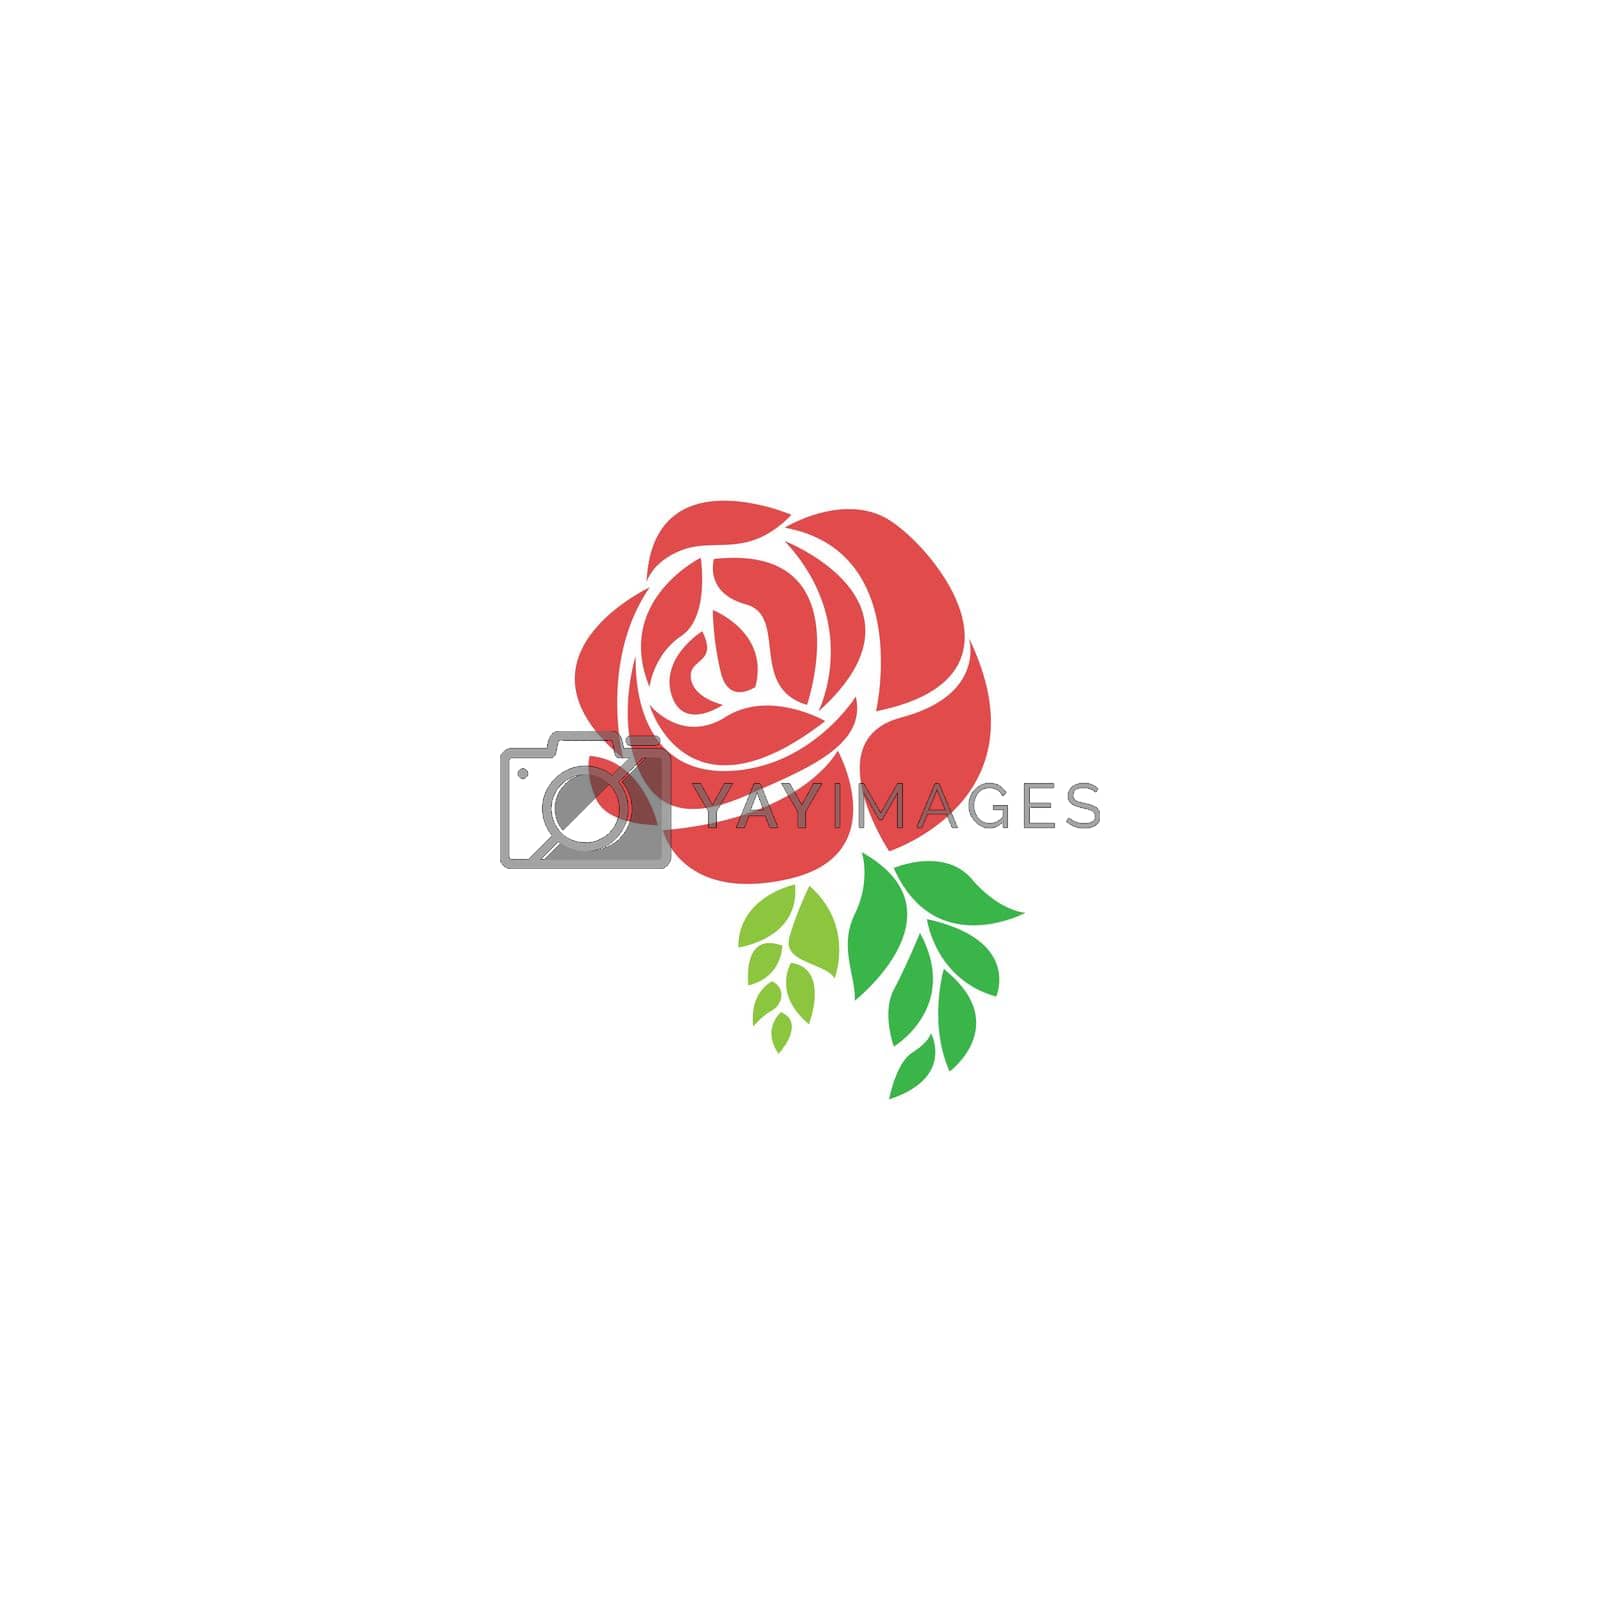 Royalty free image of Red roses icon design illustration by bellaxbudhong3